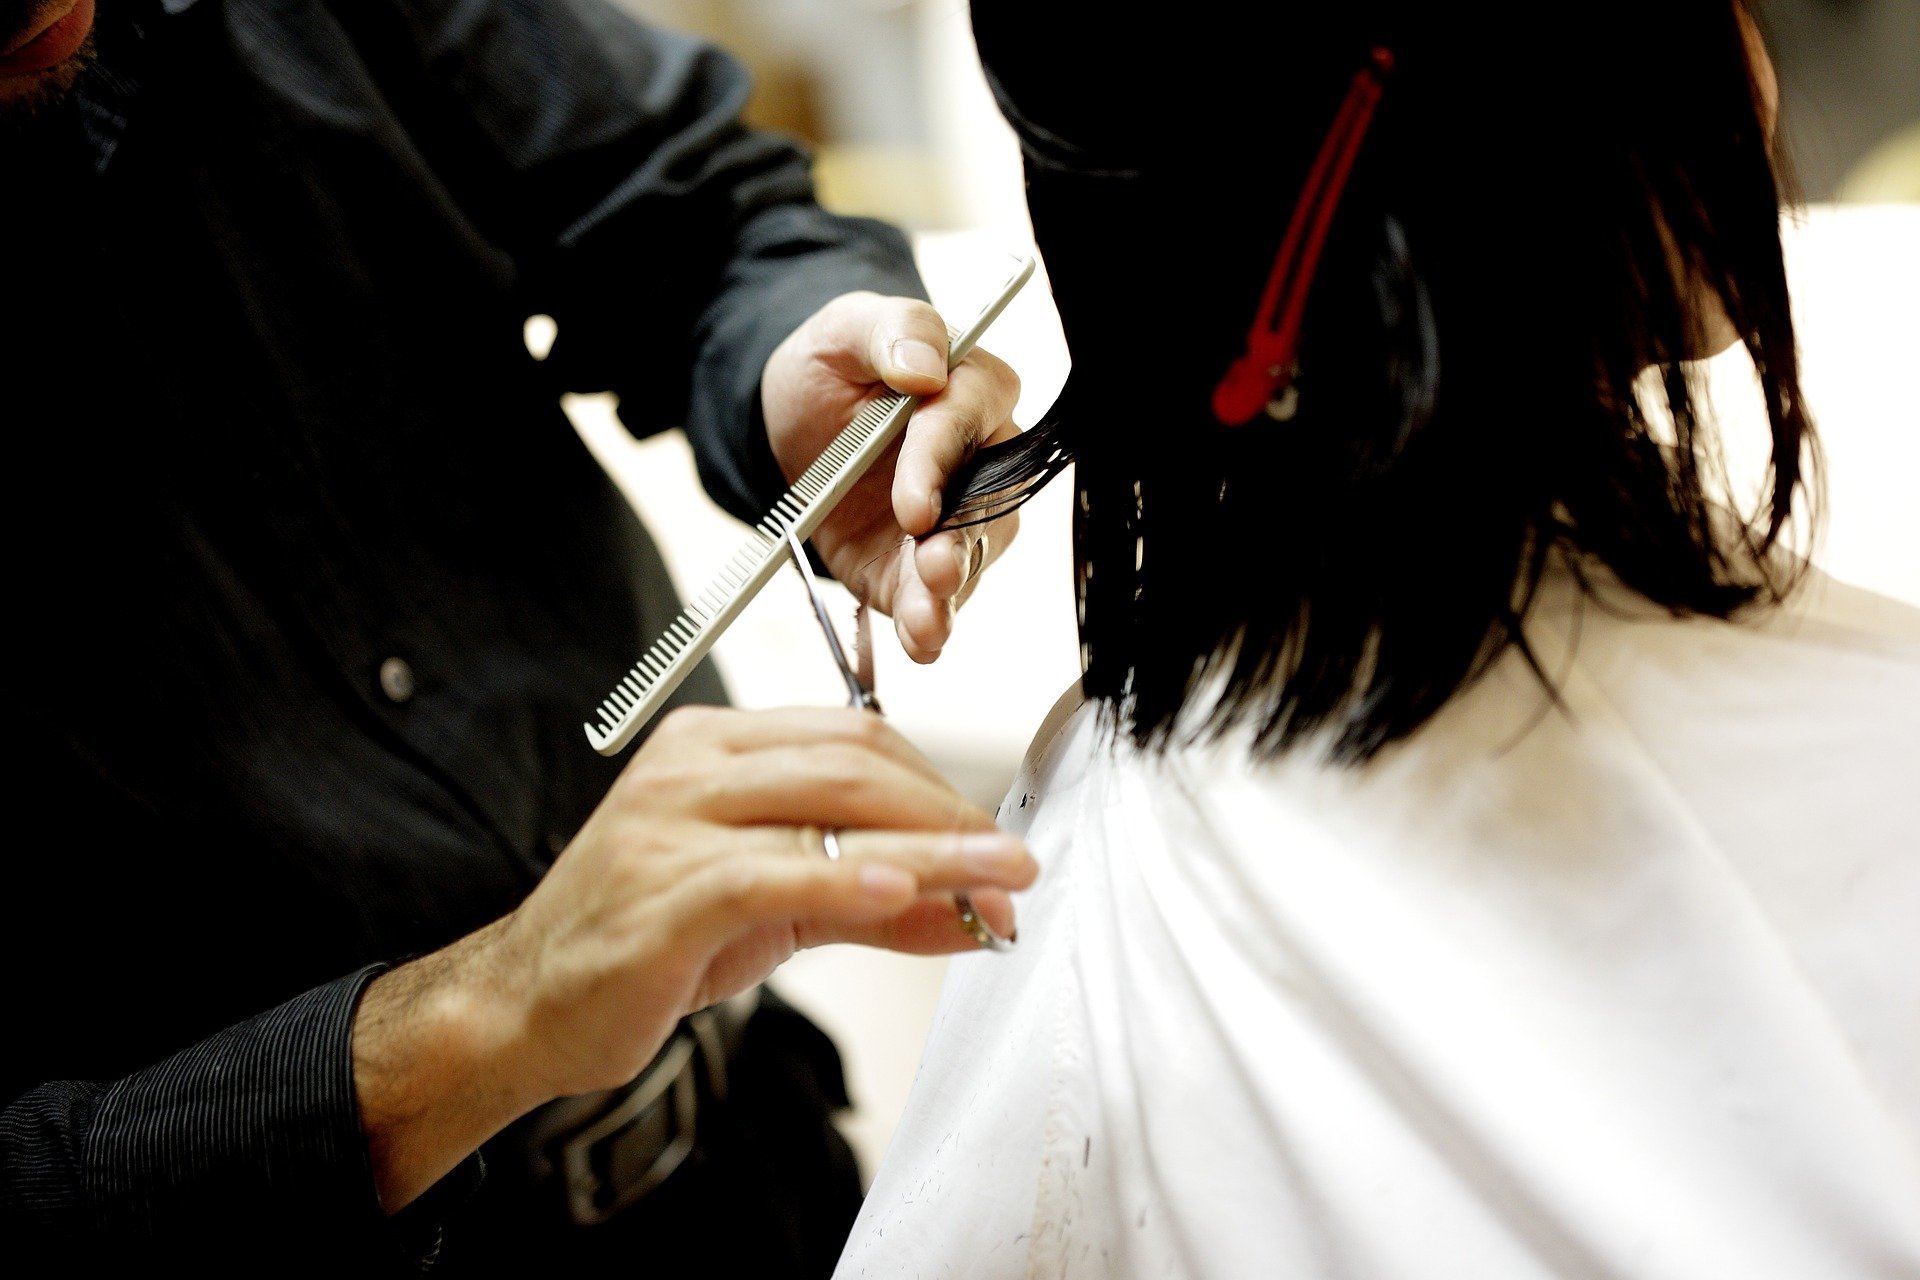 Hairdressers and barbershops are reopening on April 12